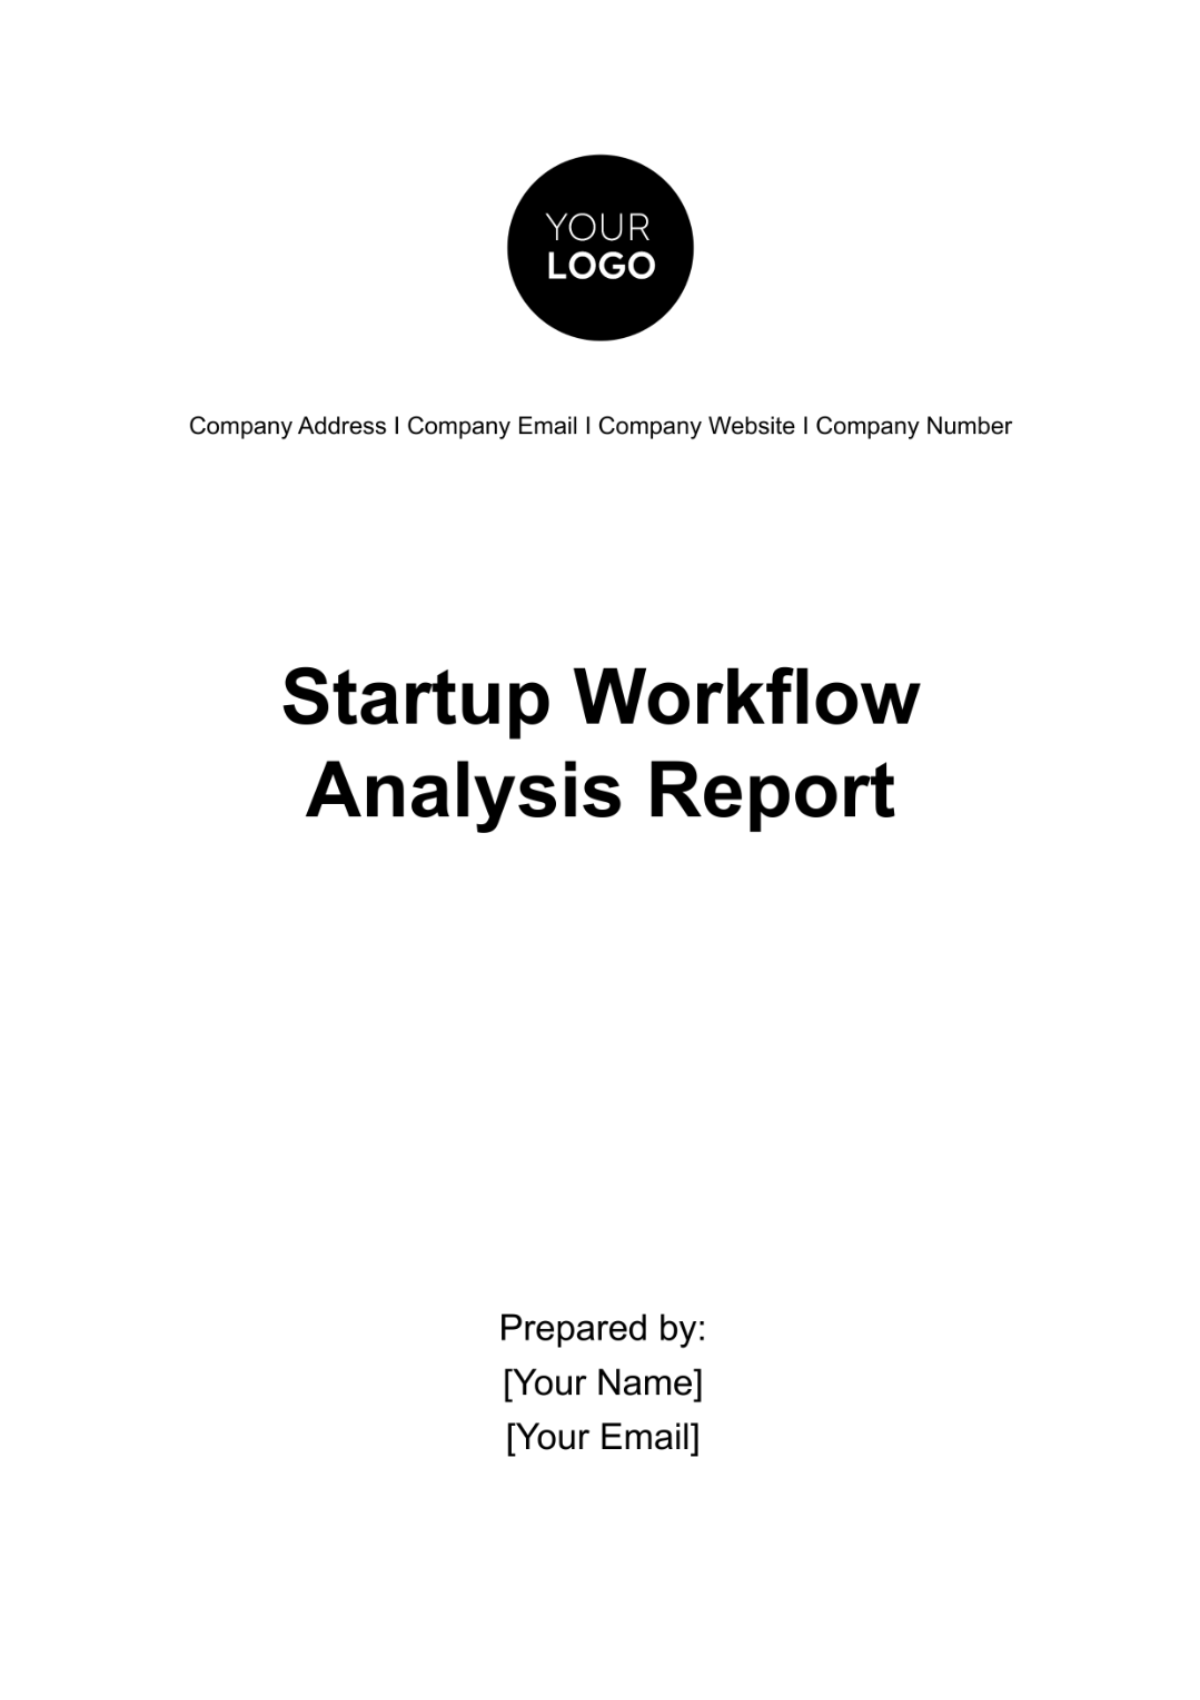 Startup Workflow Analysis Report Template